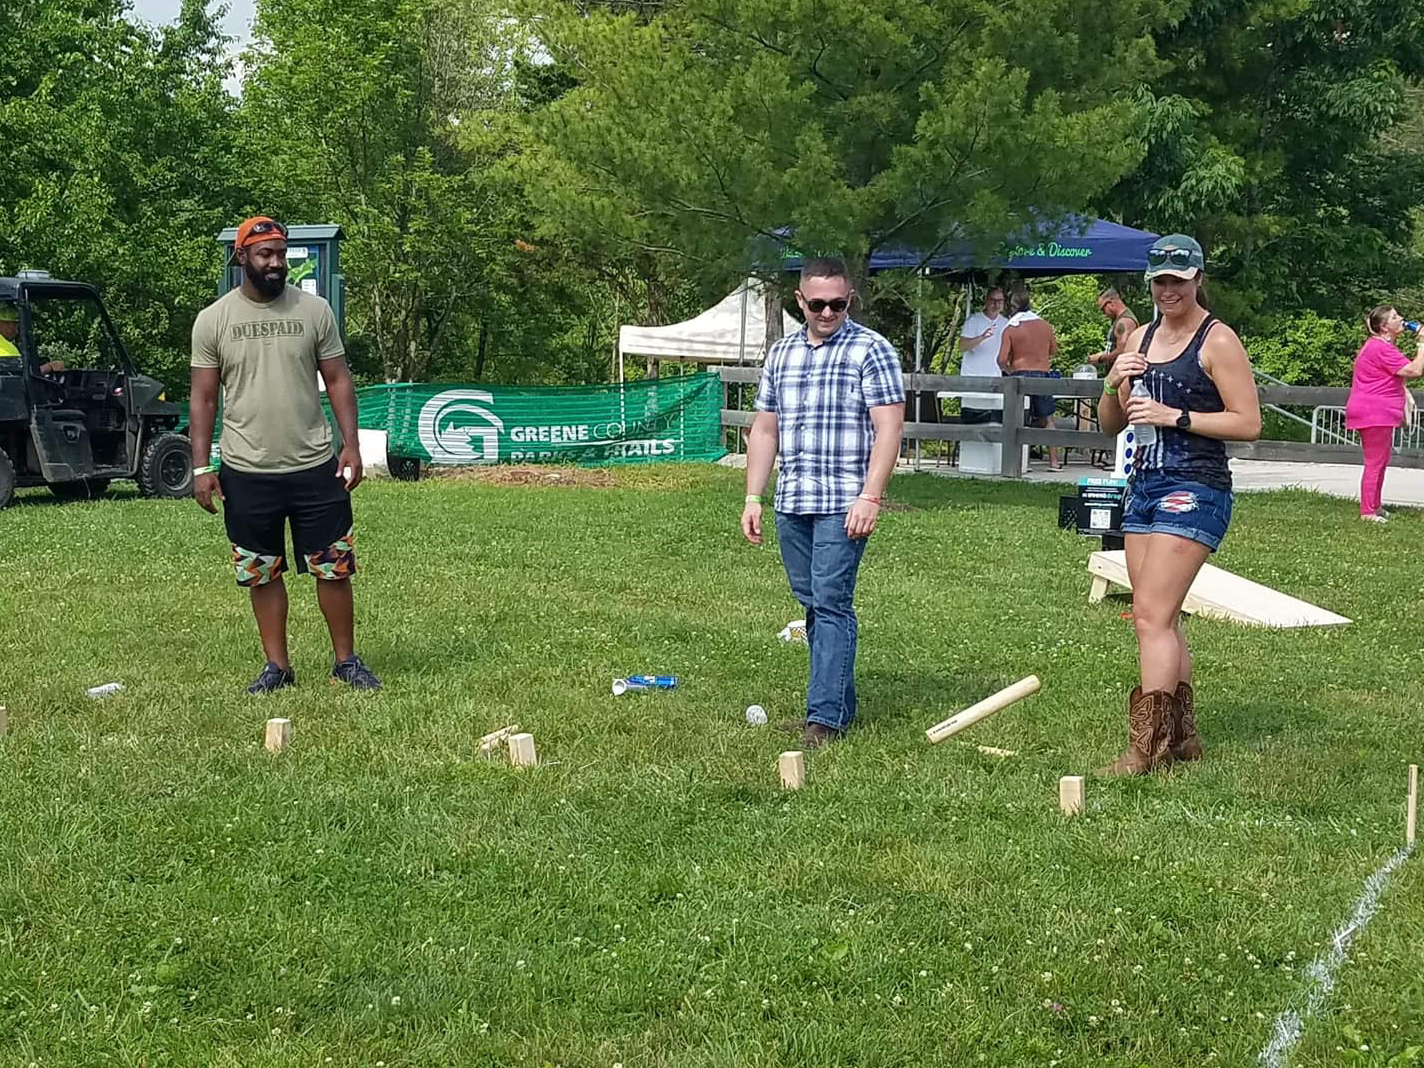 Summerfest concertgoers playing lawn games